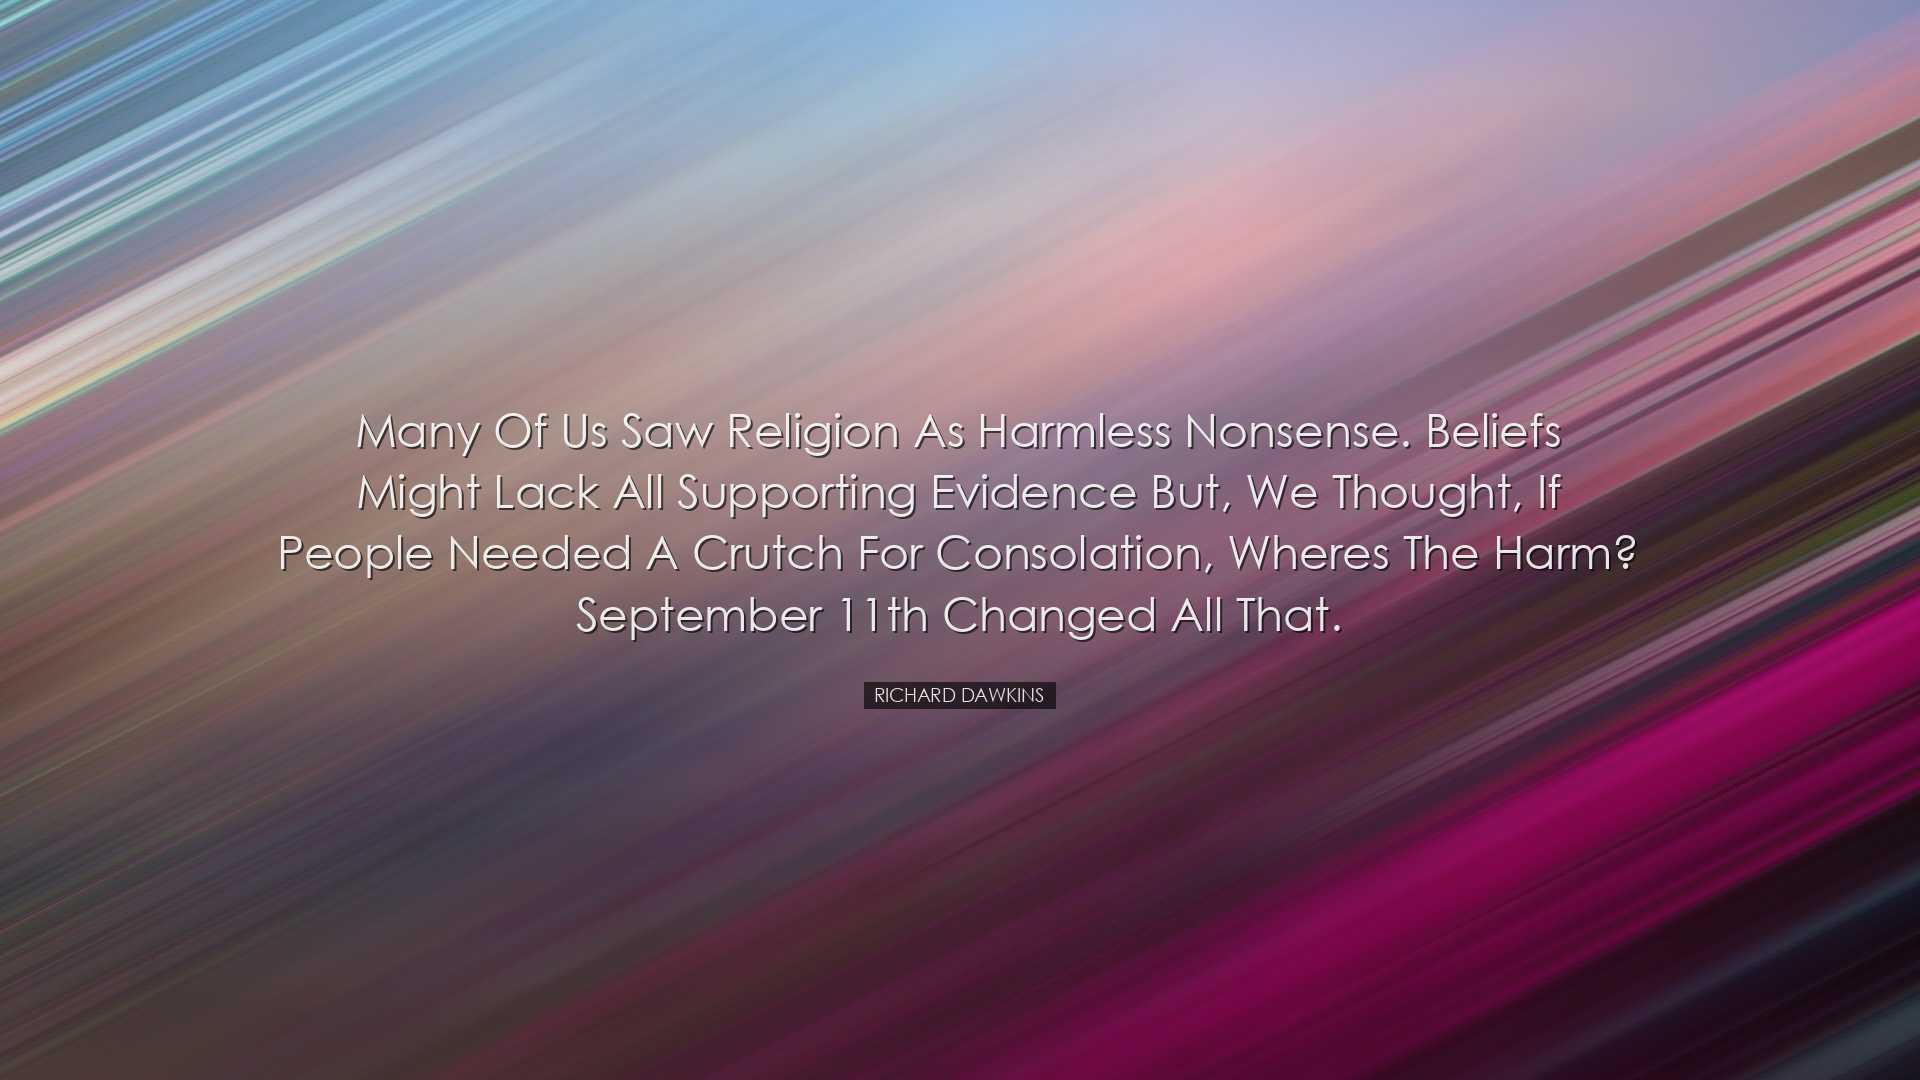 Many of us saw religion as harmless nonsense. Beliefs might lack a